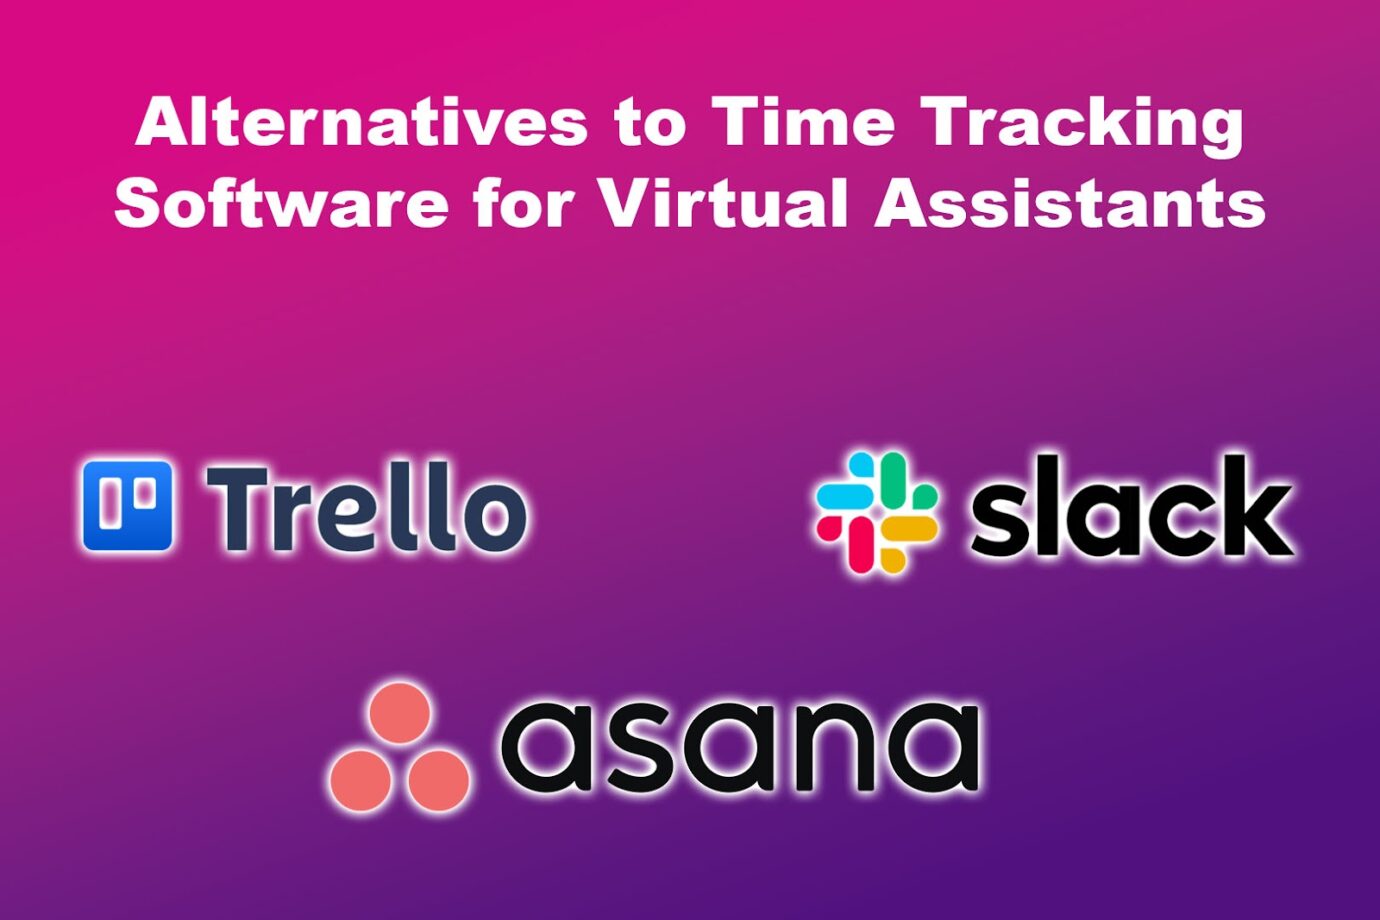 Alternatives to Time Tracking Software for Virtual Assistants